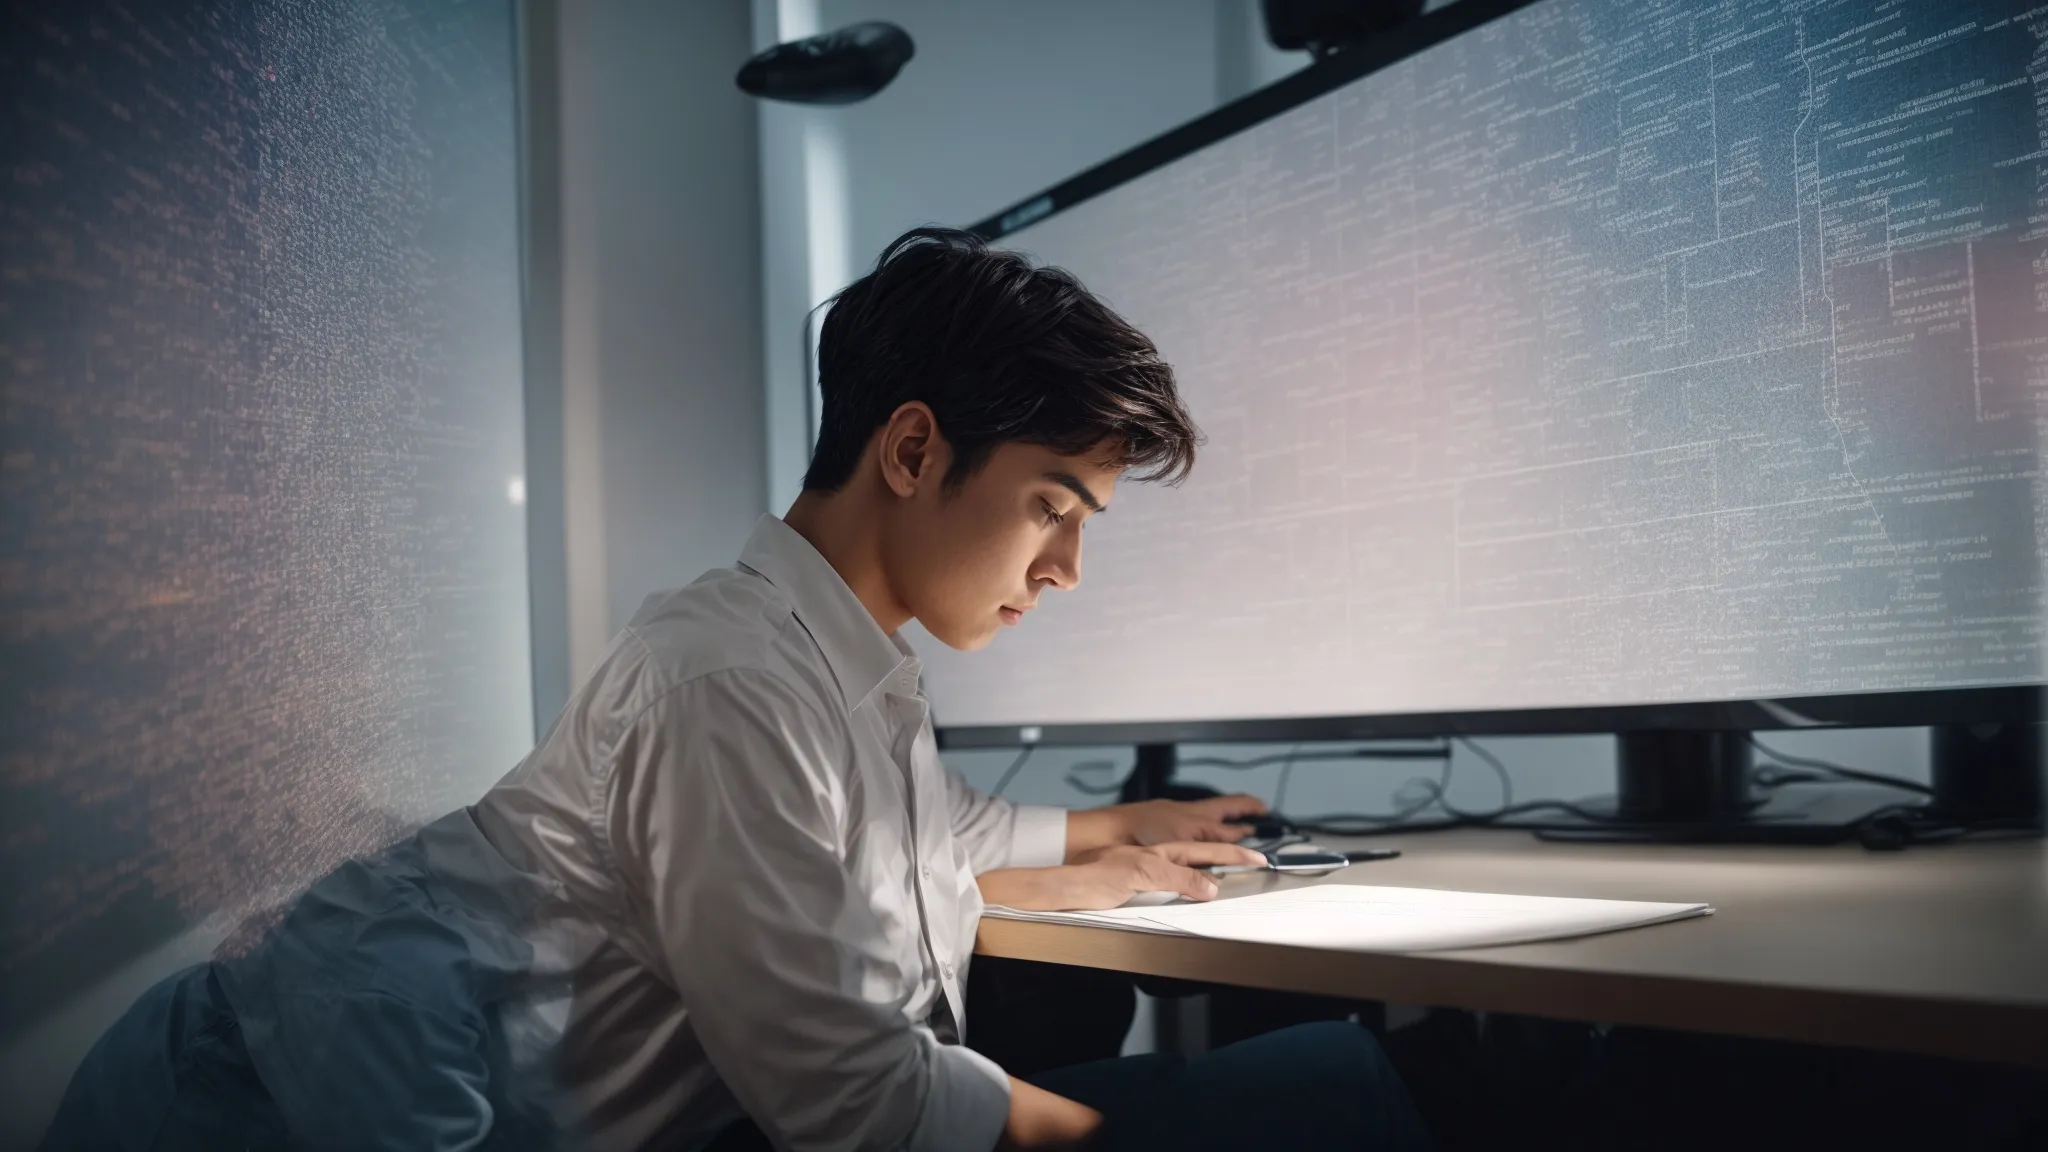 a focused individual intently studying a complex diagram of connected words and search terms on a large monitor in a modern, brightly lit office.